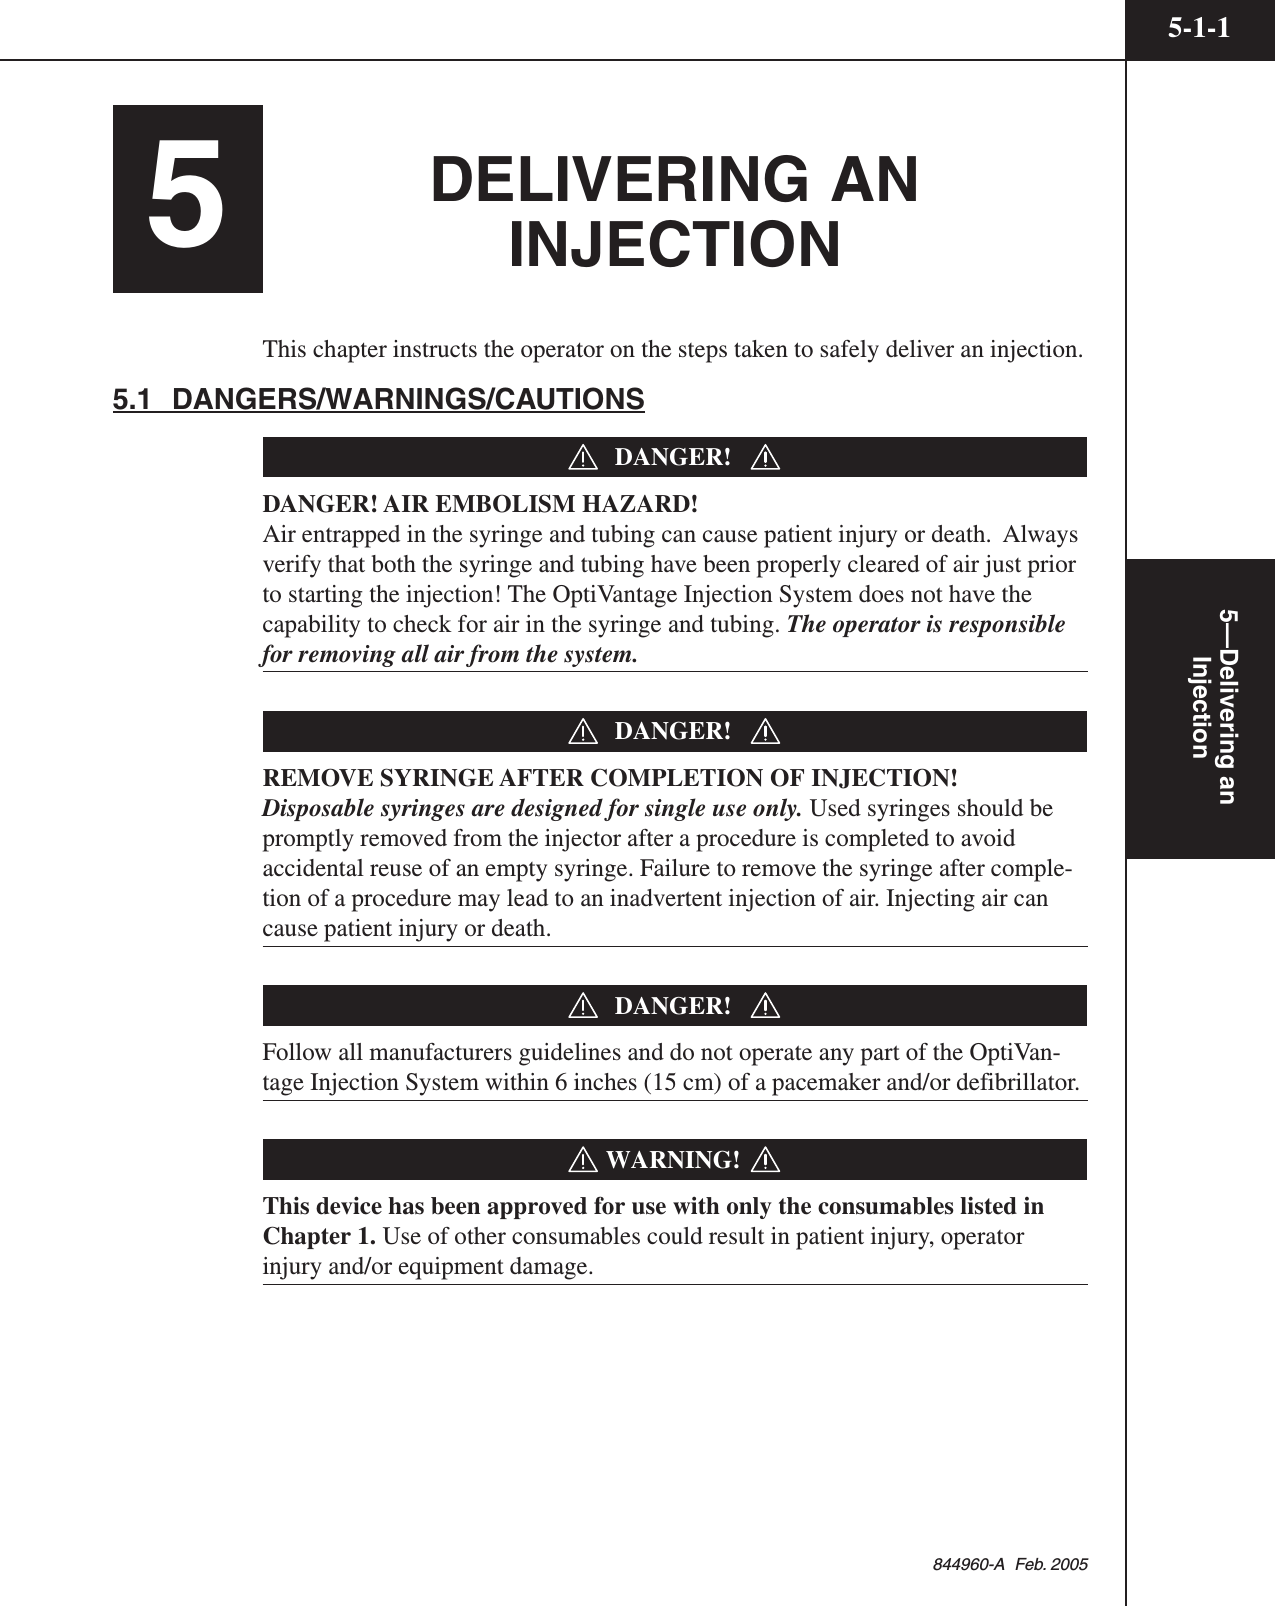 5—Delivering anInjection5-1-1844960-A  Feb. 20055DELIVERING ANINJECTIONThis chapter instructs the operator on the steps taken to safely deliver an injection.5.1  DANGERS/WARNINGS/CAUTIONSDANGER!DANGER! AIR EMBOLISM HAZARD!Air entrapped in the syringe and tubing can cause patient injury or death.  Alwaysverify that both the syringe and tubing have been properly cleared of air just priorto starting the injection! The OptiVantage Injection System does not have thecapability to check for air in the syringe and tubing. The operator is responsiblefor removing all air from the system.DANGER!REMOVE SYRINGE AFTER COMPLETION OF INJECTION!Disposable syringes are designed for single use only. Used syringes should bepromptly removed from the injector after a procedure is completed to avoidaccidental reuse of an empty syringe. Failure to remove the syringe after comple-tion of a procedure may lead to an inadvertent injection of air. Injecting air cancause patient injury or death.DANGER!Follow all manufacturers guidelines and do not operate any part of the OptiVan-tage Injection System within 6 inches (15 cm) of a pacemaker and/or defibrillator.WARNING!This device has been approved for use with only the consumables listed inChapter 1. Use of other consumables could result in patient injury, operatorinjury and/or equipment damage.